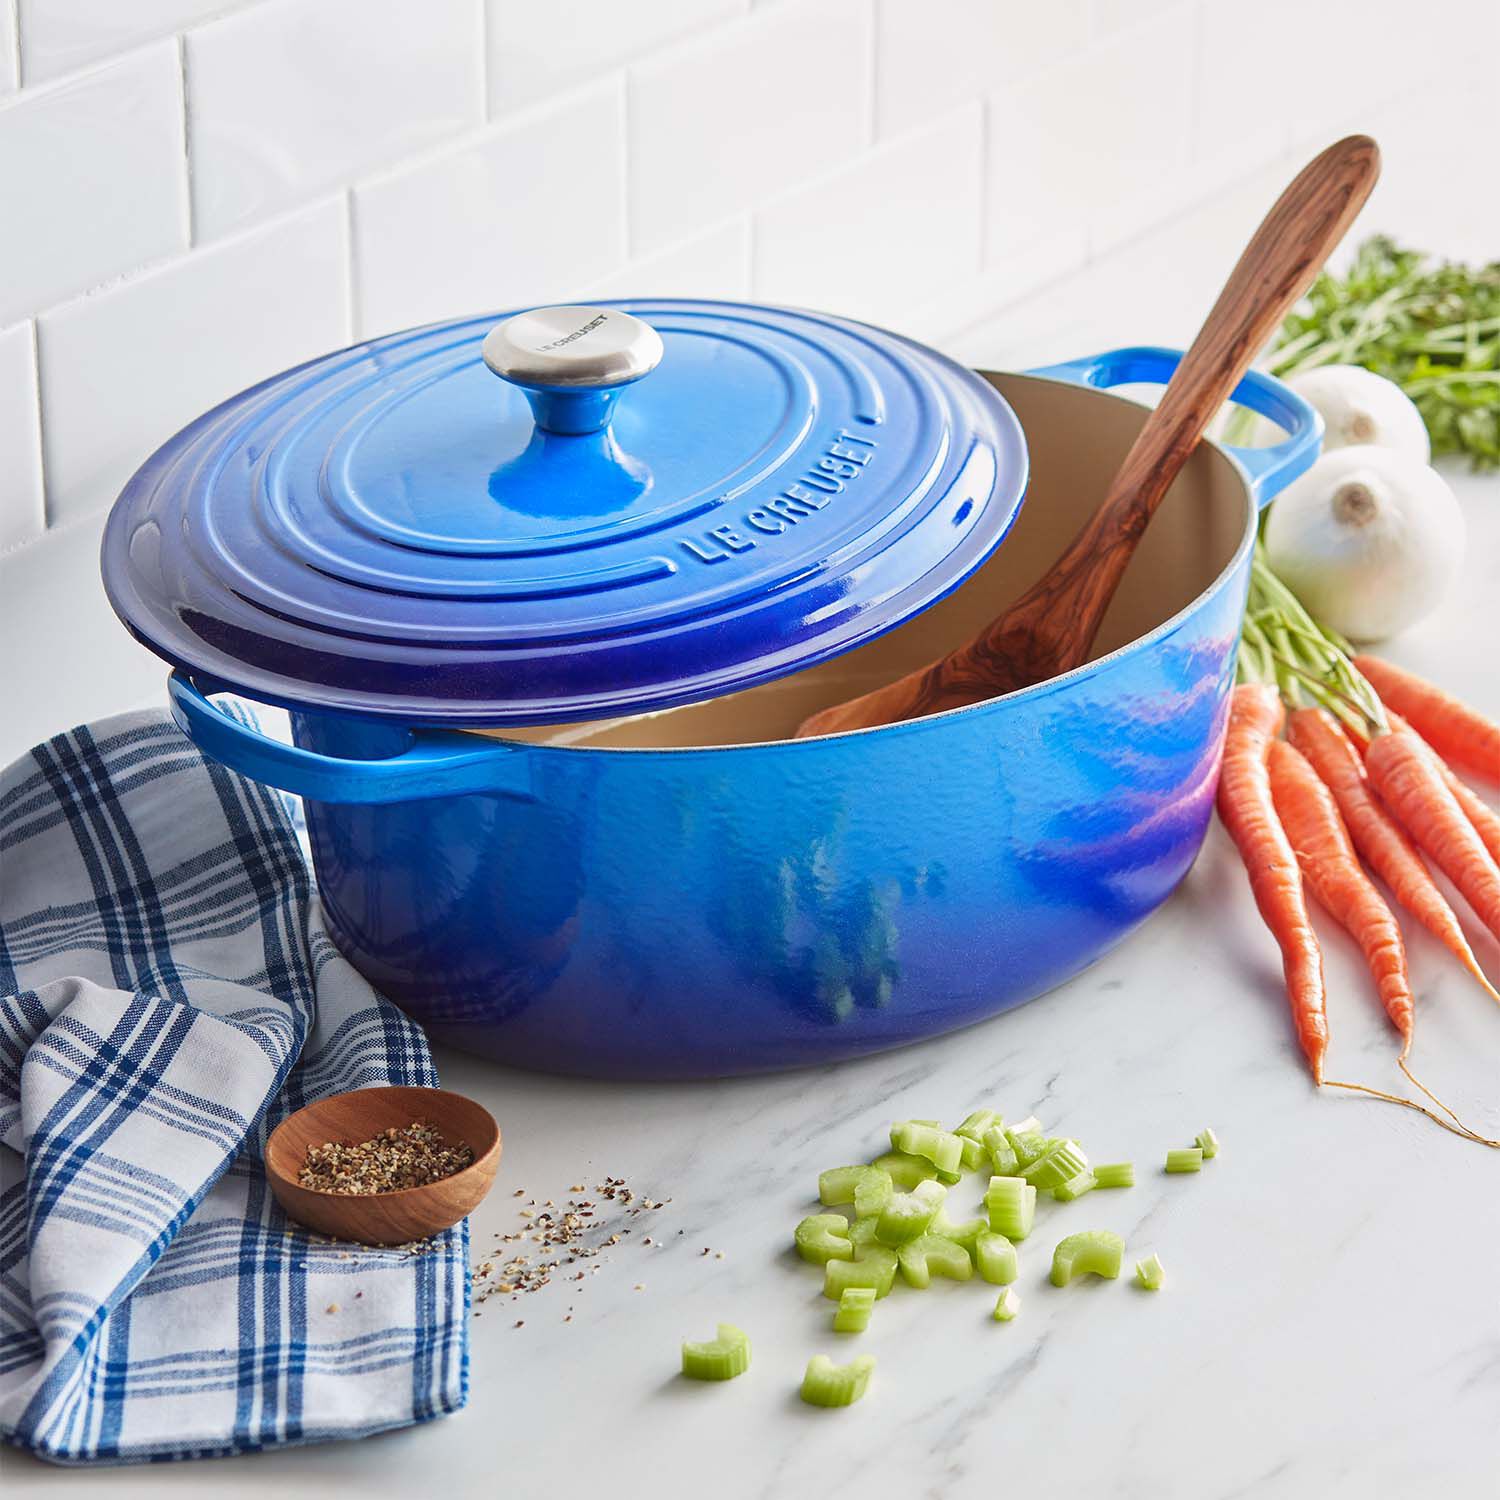 Le Creuset's Oval Dutch Oven Is Nearly 50 Percent Off On